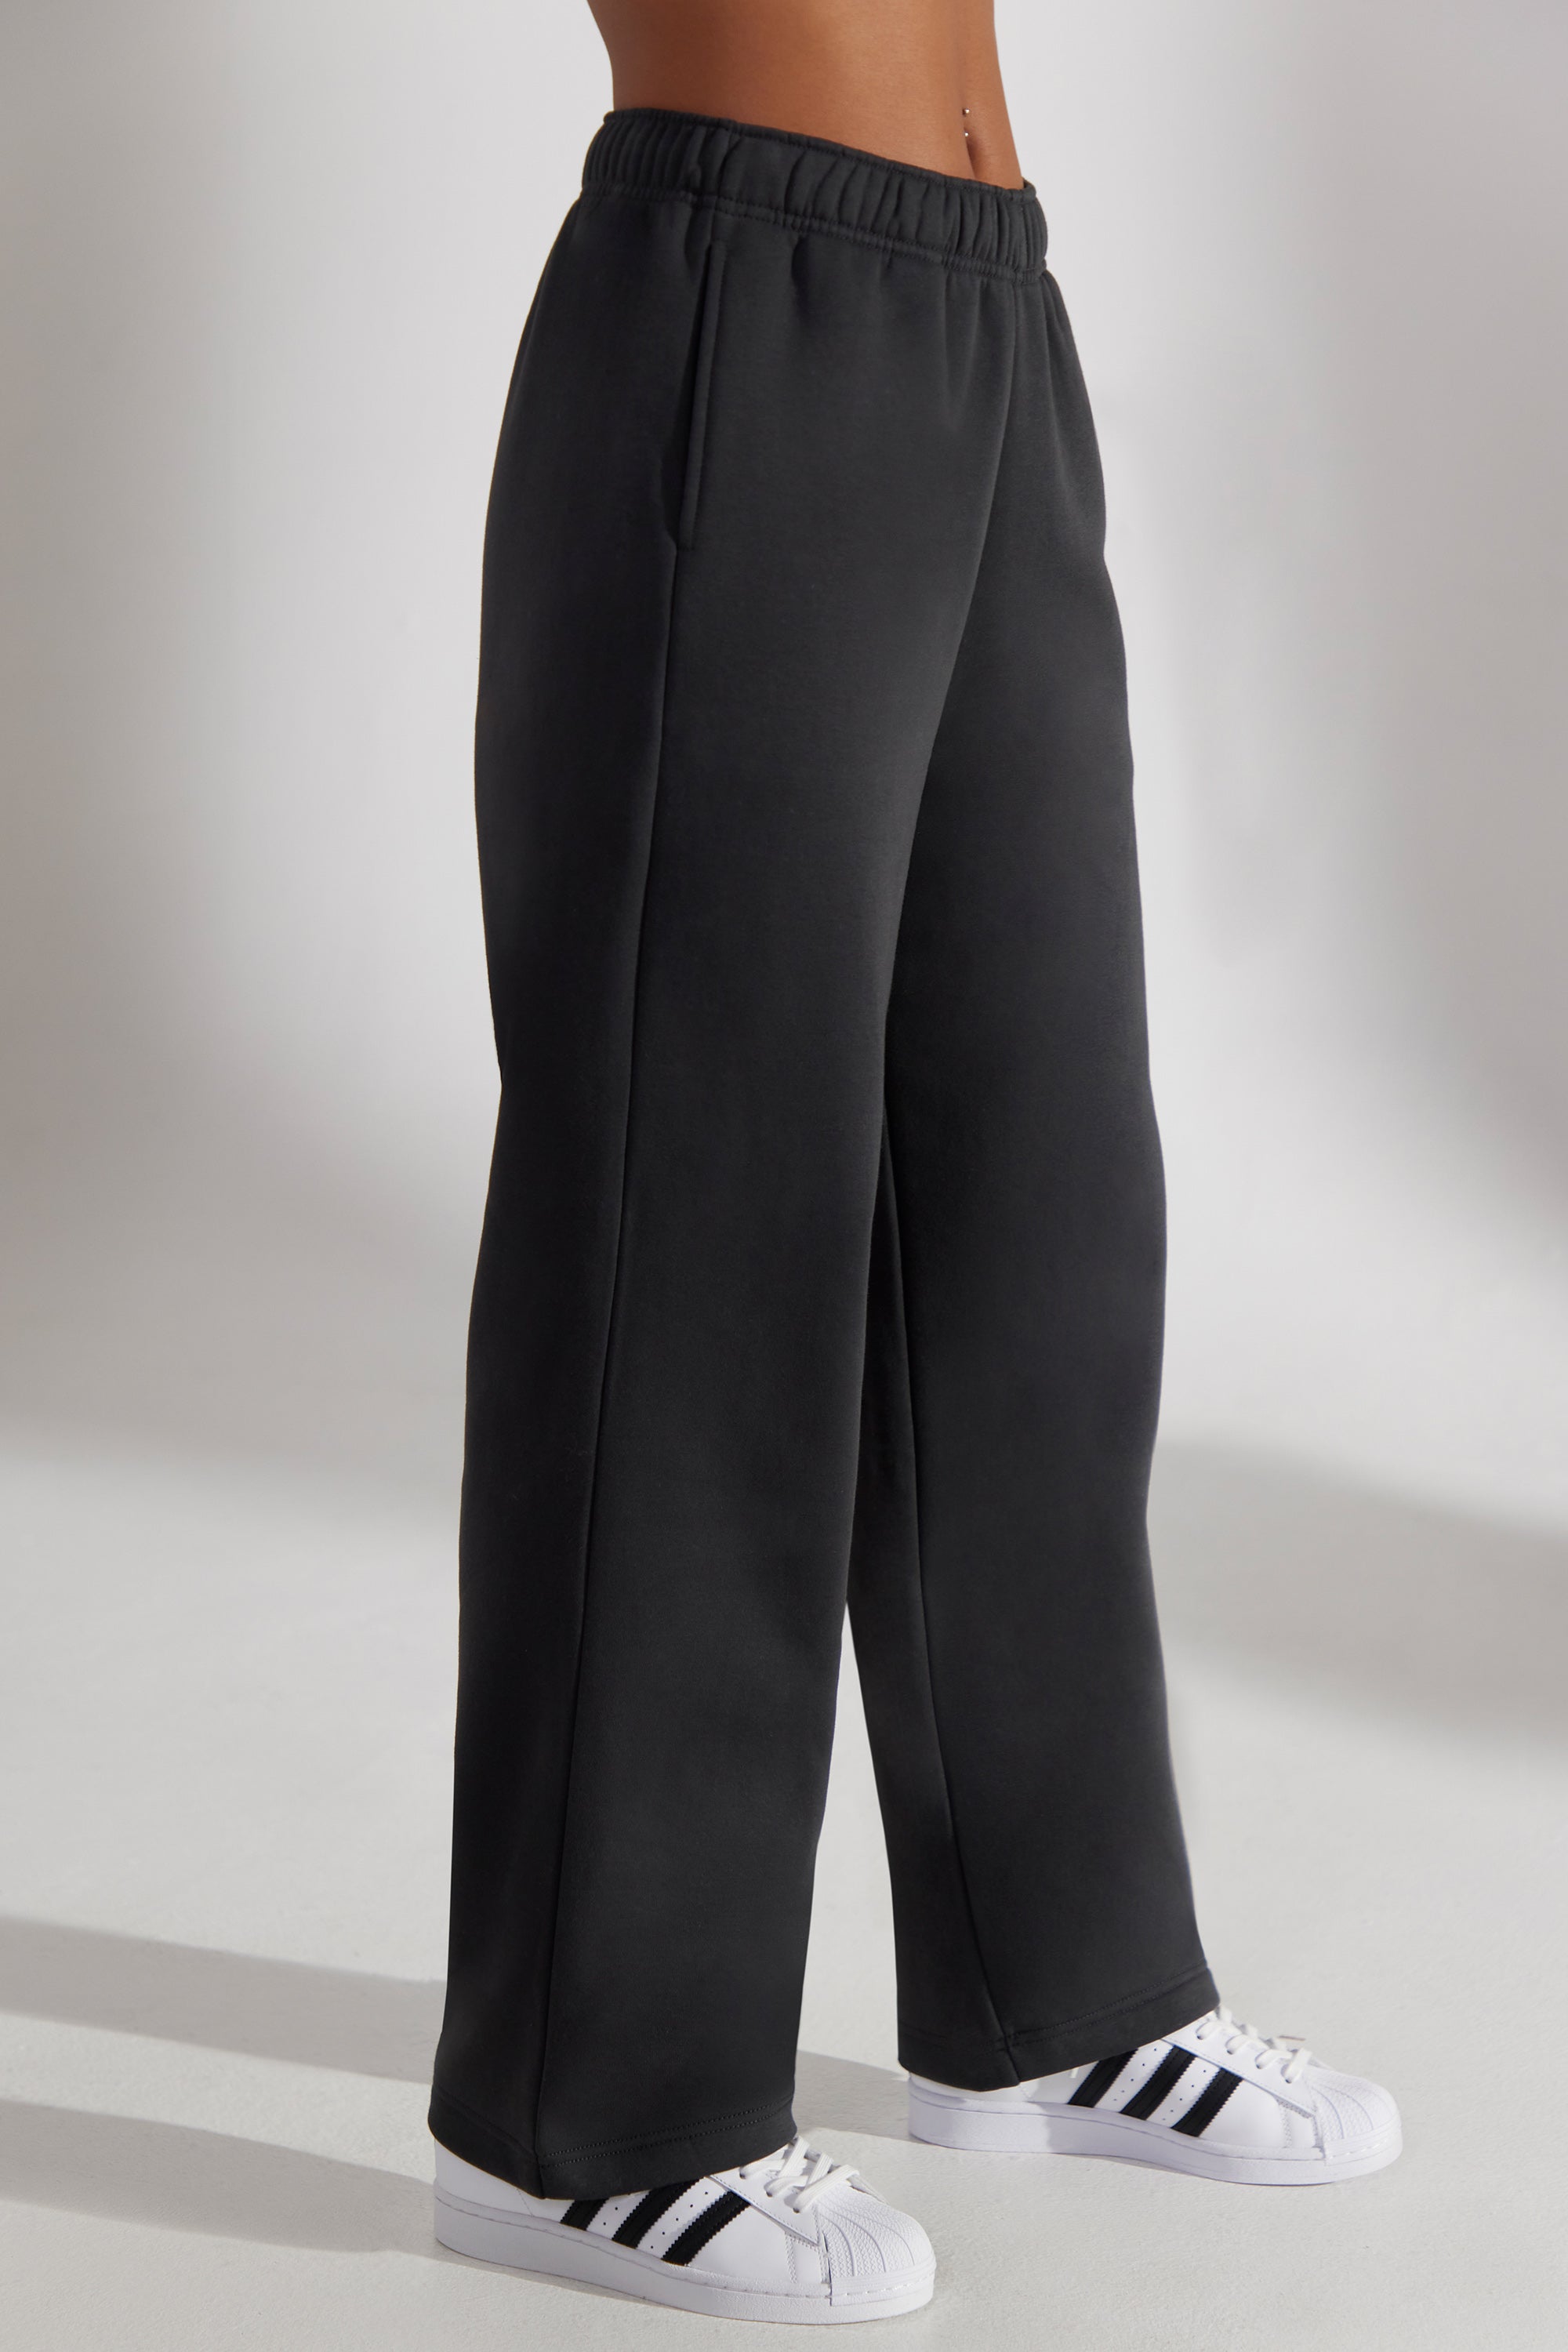 Principal - Wide Leg Joggers in Washed Black